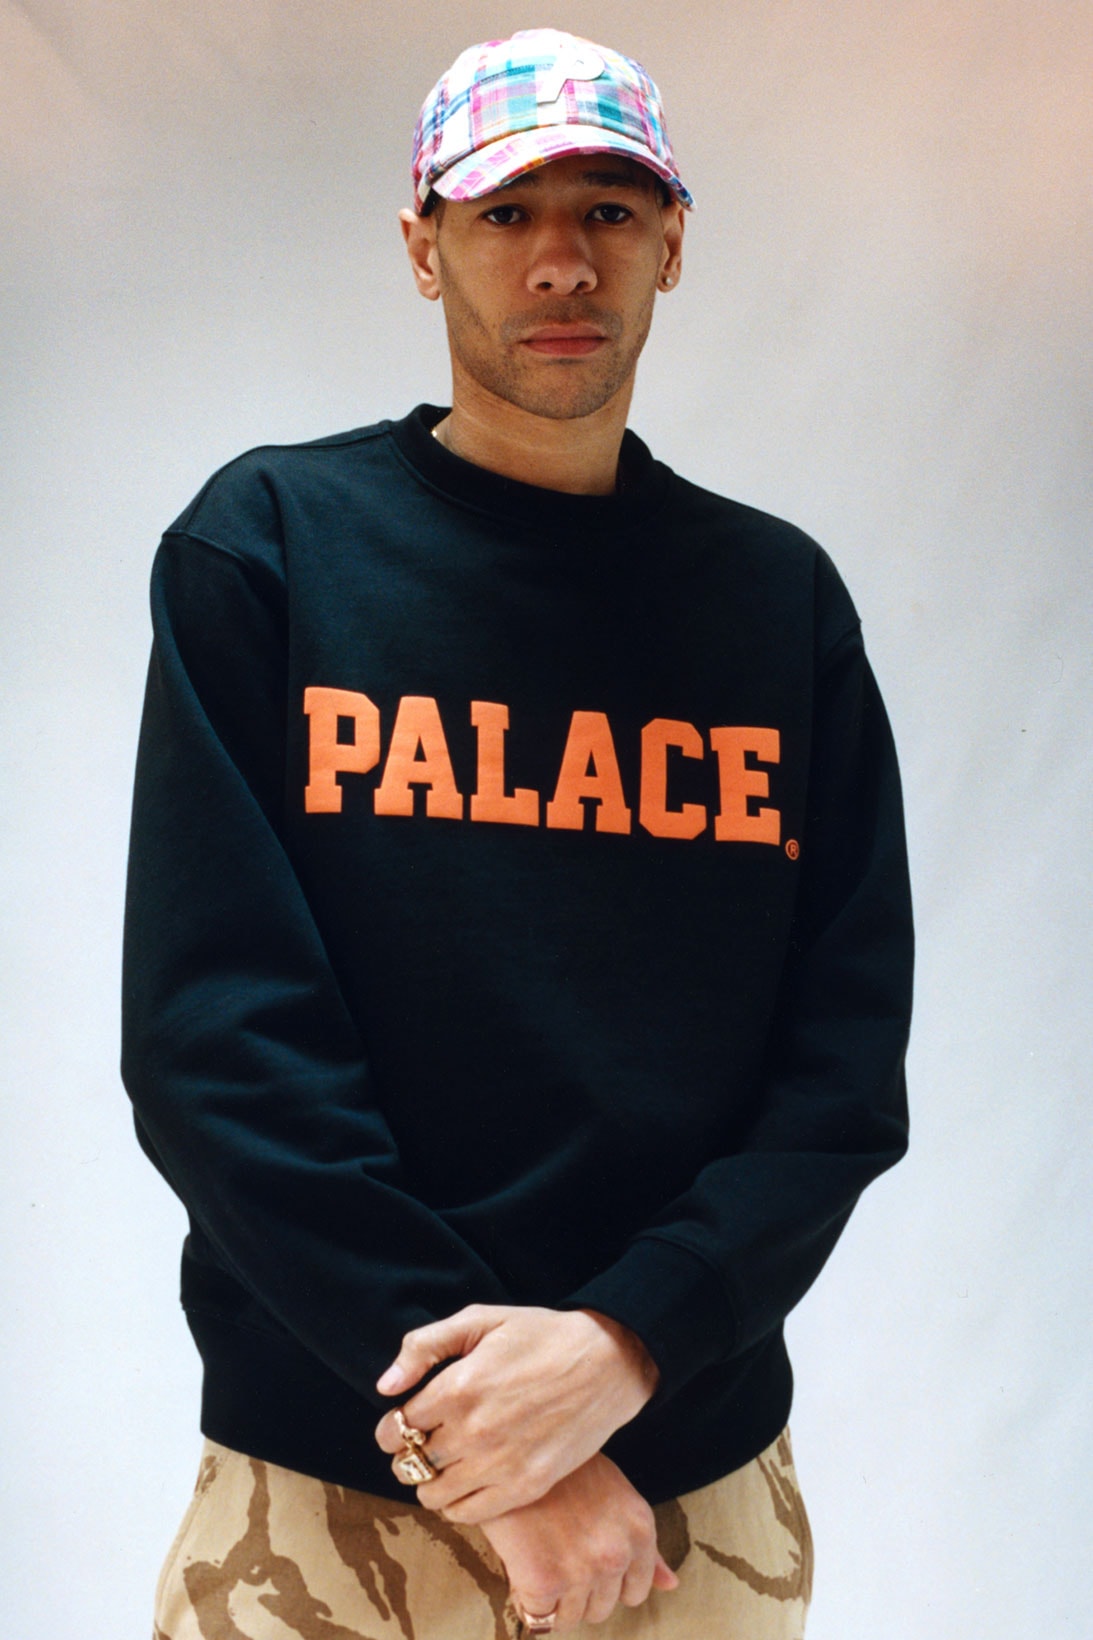 palace skateboards summer 2021 lookbook collection drop logo sweater hat plaid